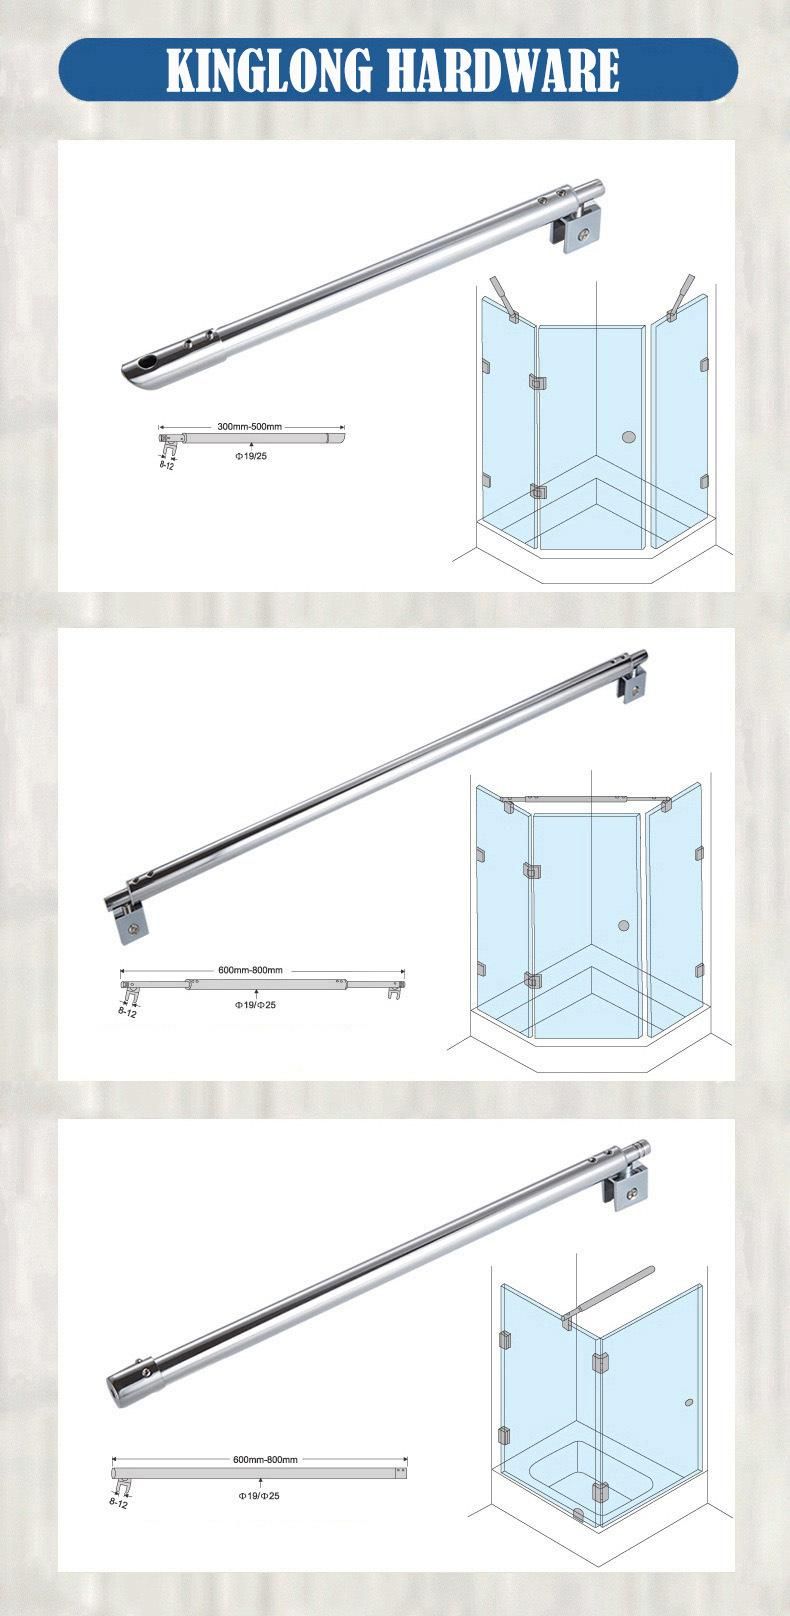 New Design Stainless Steel Bathroom Fitting Adjustable Length Fixed Bar/Clip Shower Room Support Rod